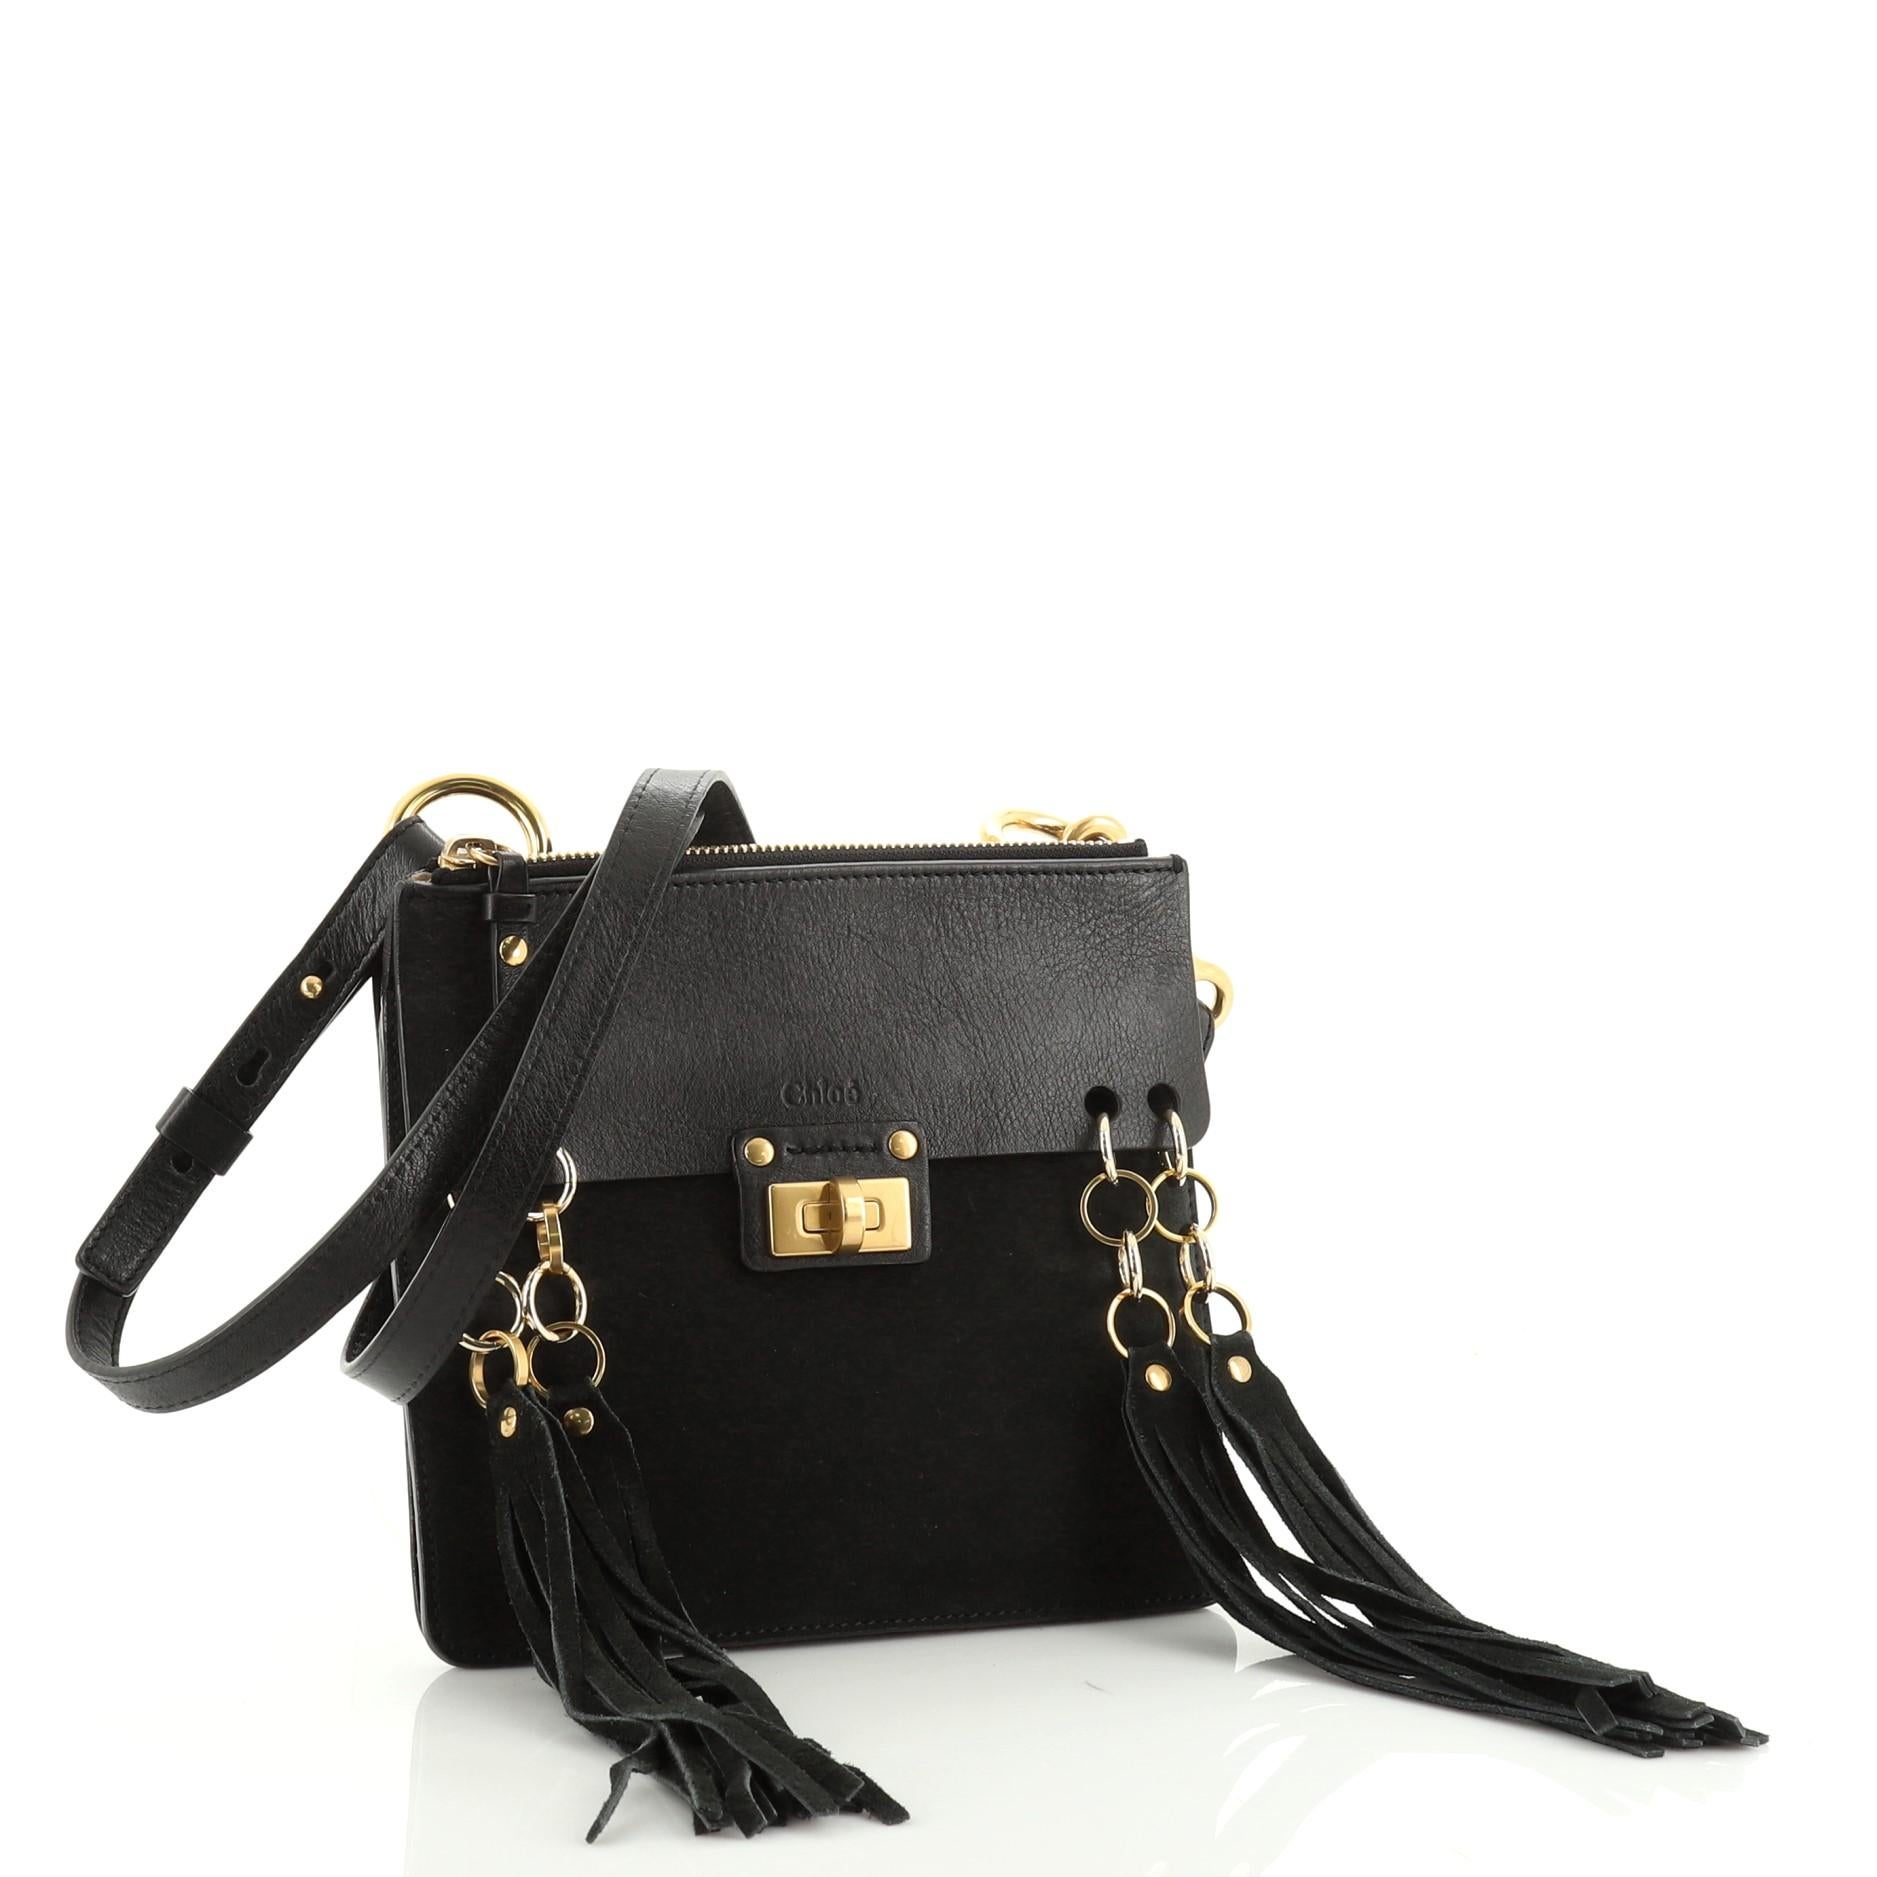 This Chloe Jane Crossbody Bag Leather and Suede Small. crafted from black leather, features an adjustable crossbody strap, front flap with swingy multicolor tassels and turn-lock detail, slip pocket under flap and gold-tone hardware. It opens to two